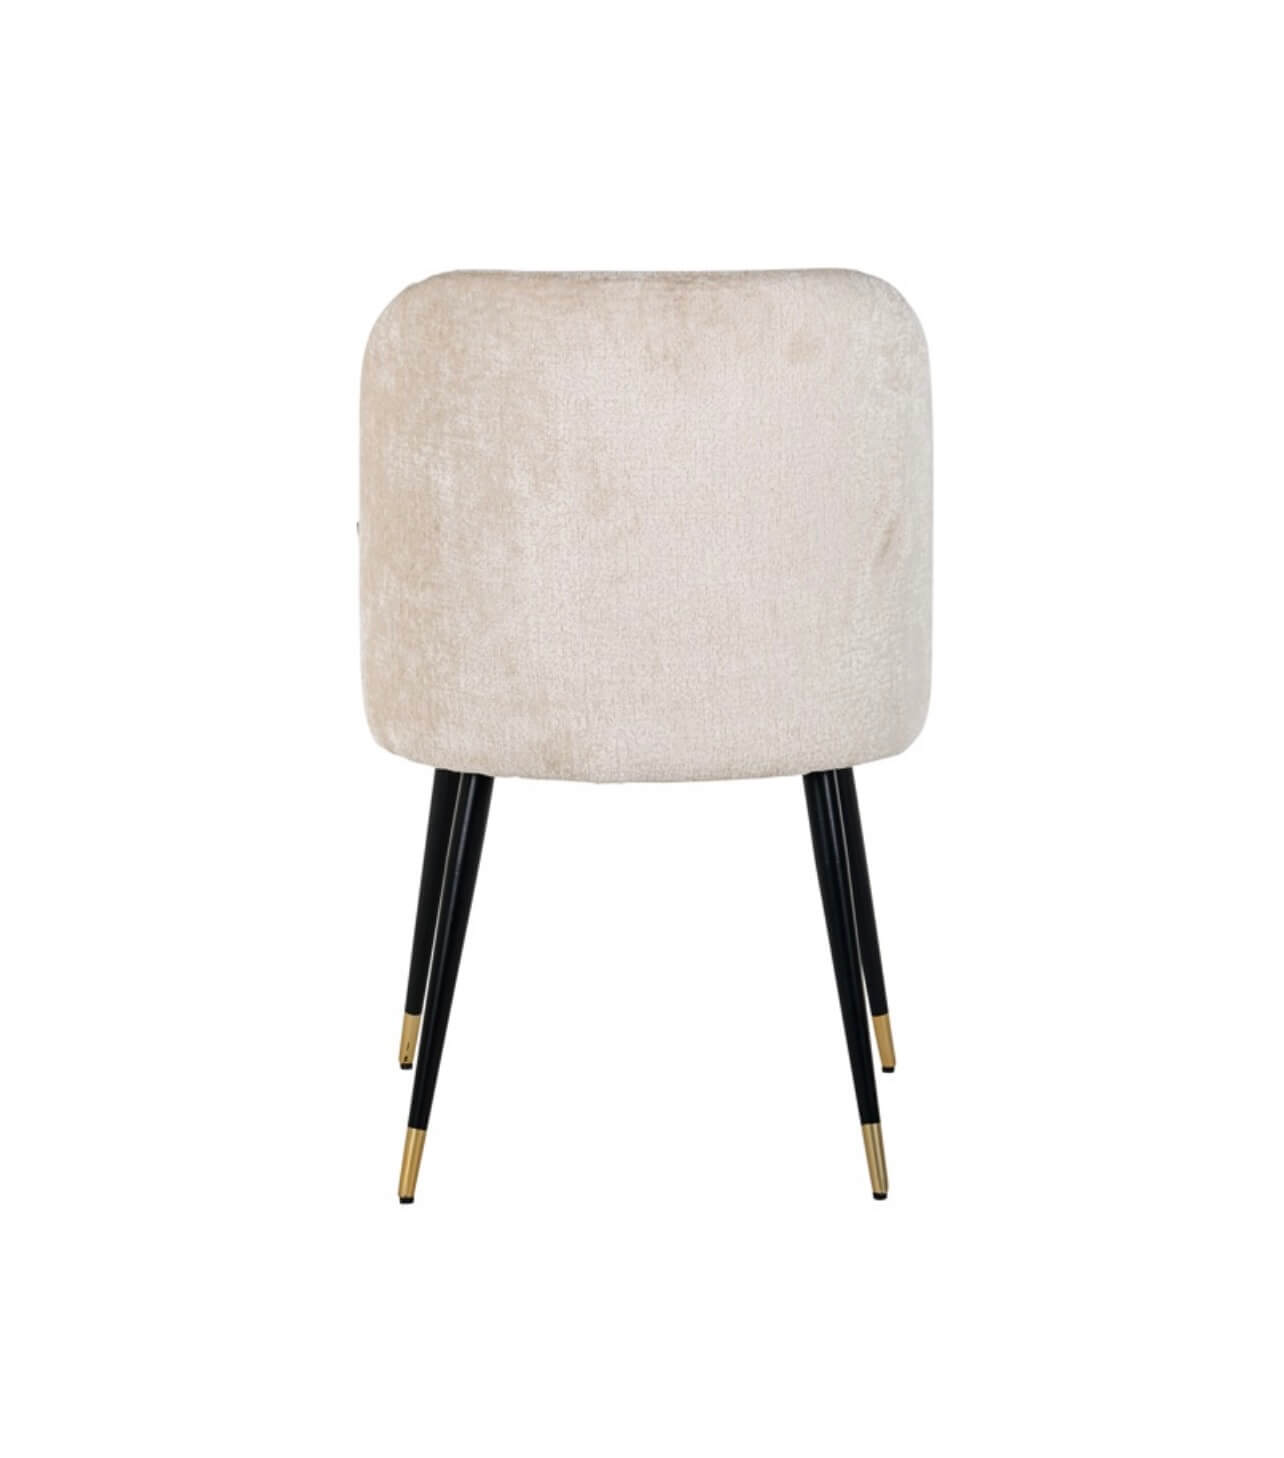 White Chenille Dining Chair